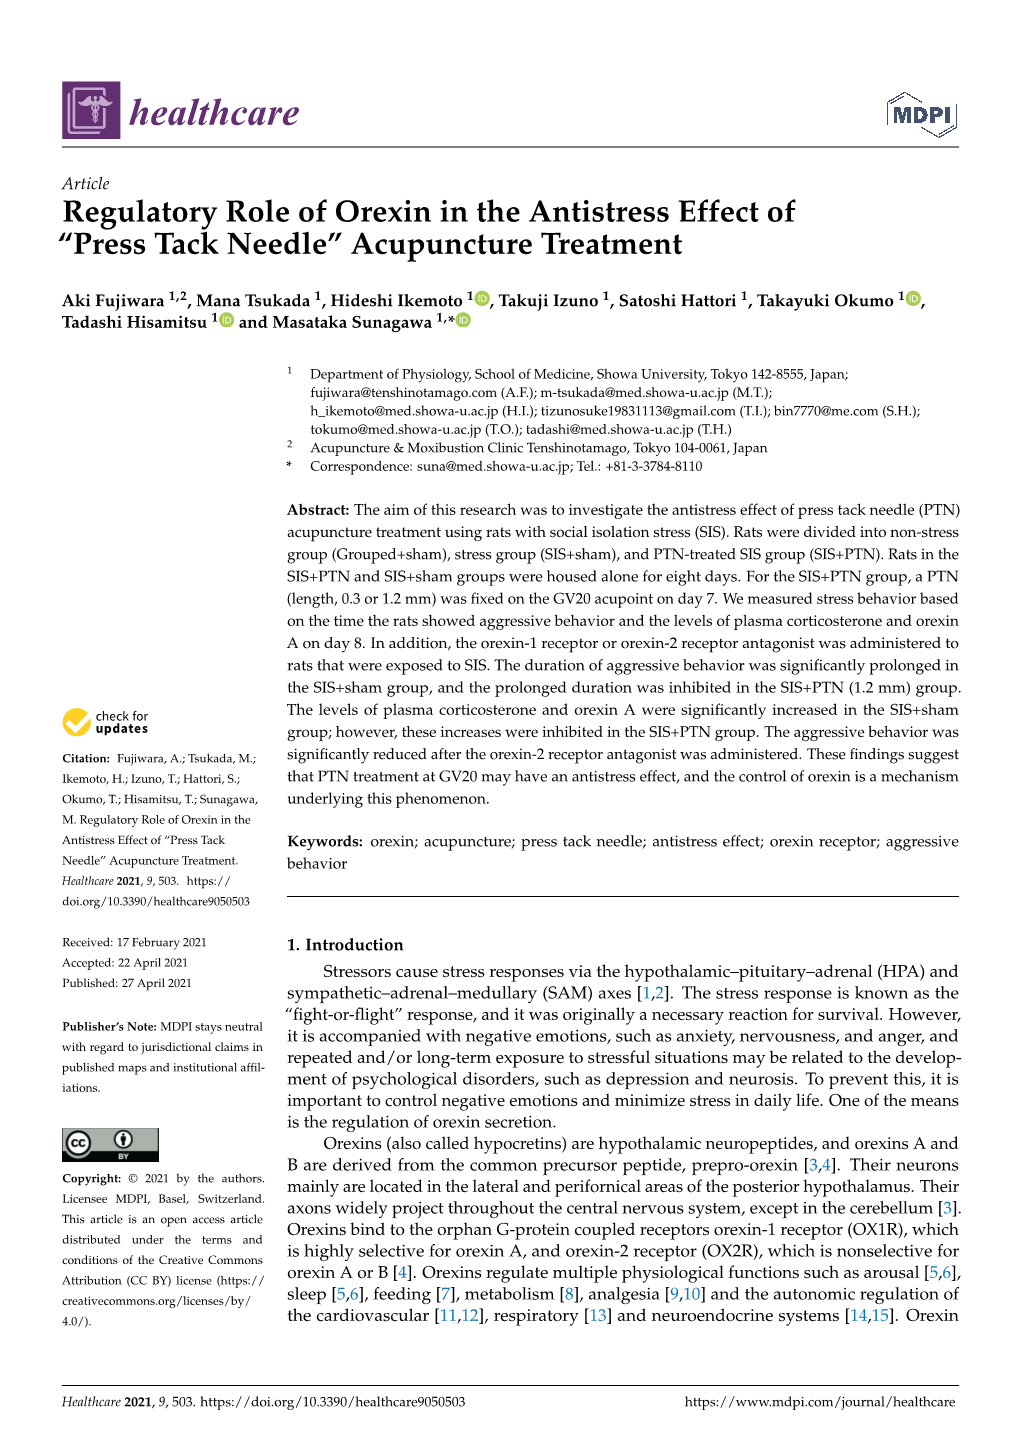 Regulatory Role of Orexin in the Antistress Effect of “Press Tack Needle” Acupuncture Treatment